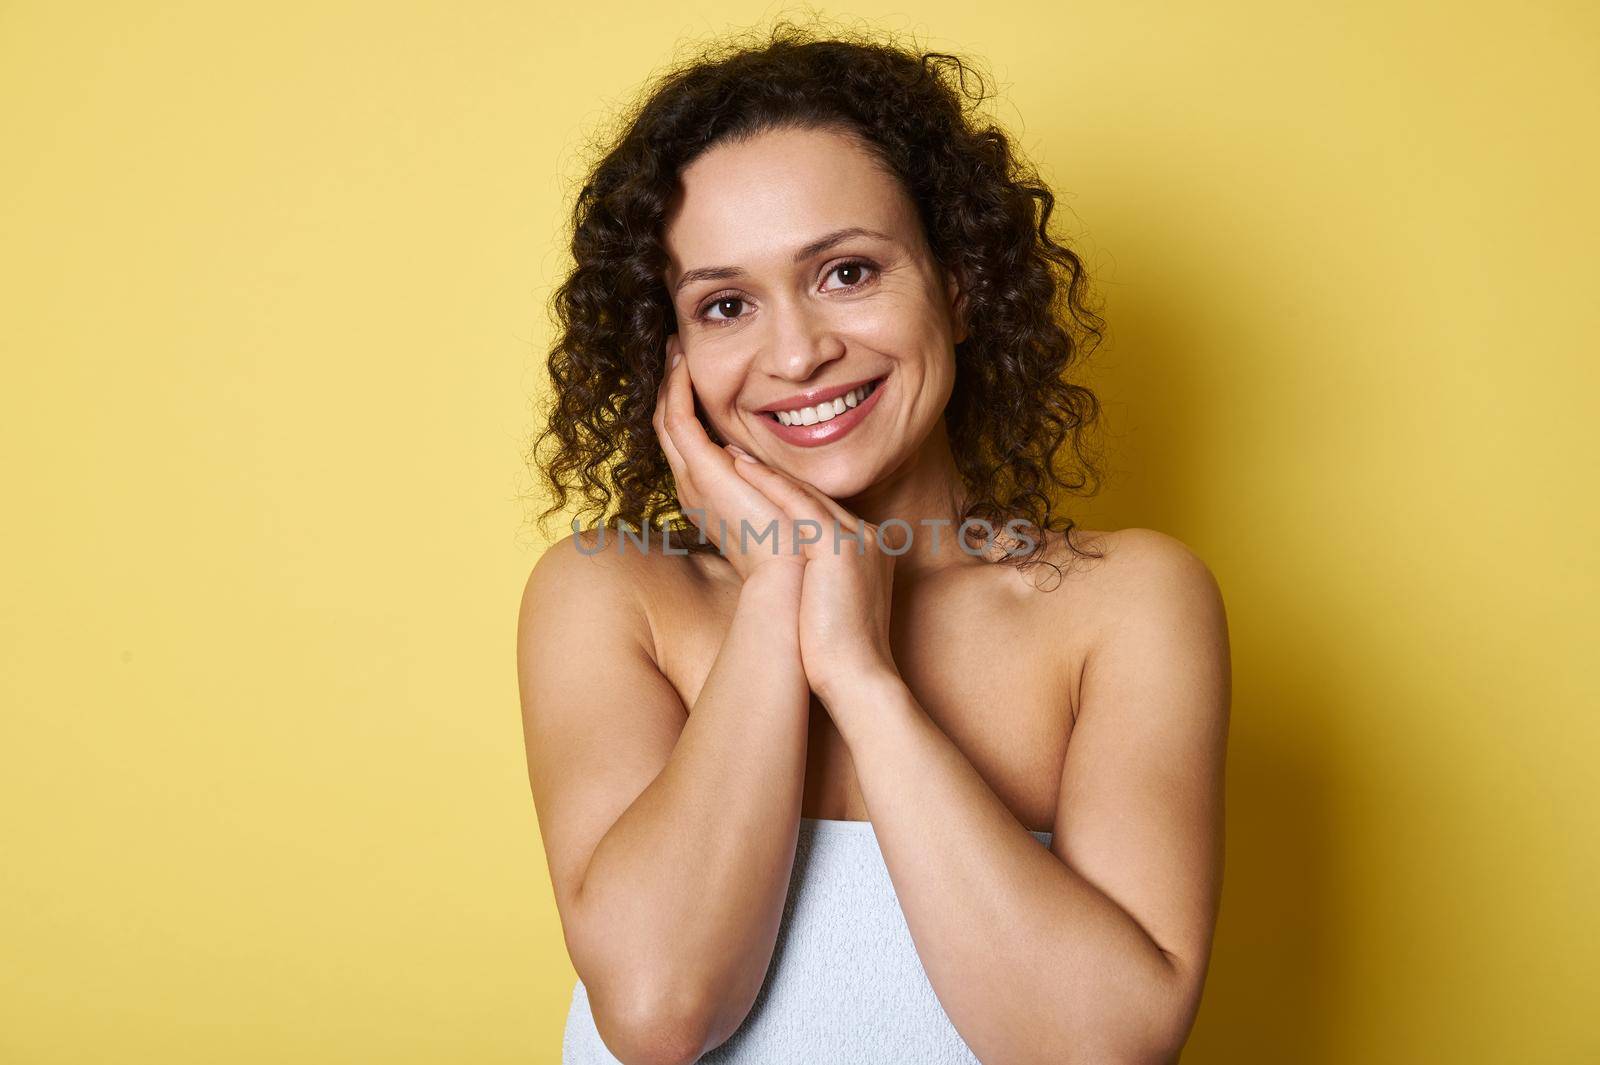 Portrait of beautiful young smiling woman with curly short hair, looking at camera while posing over yellow background with copy space by artgf